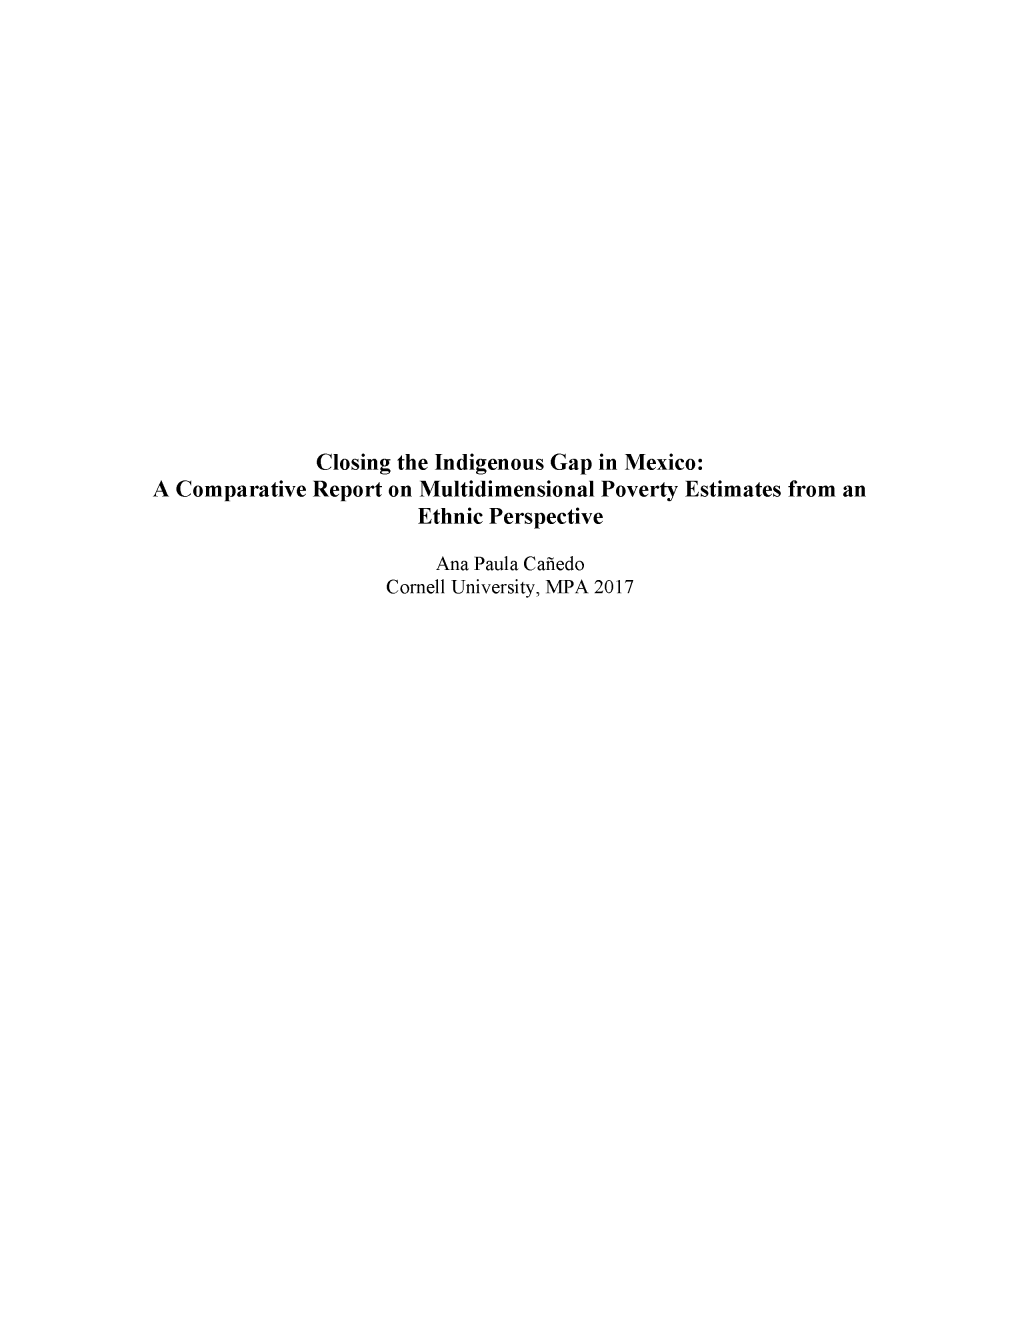 Closing the Indigenous Gap in Mexico: a Comparative Report on Multidimensional Poverty Estimates from an Ethnic Perspective